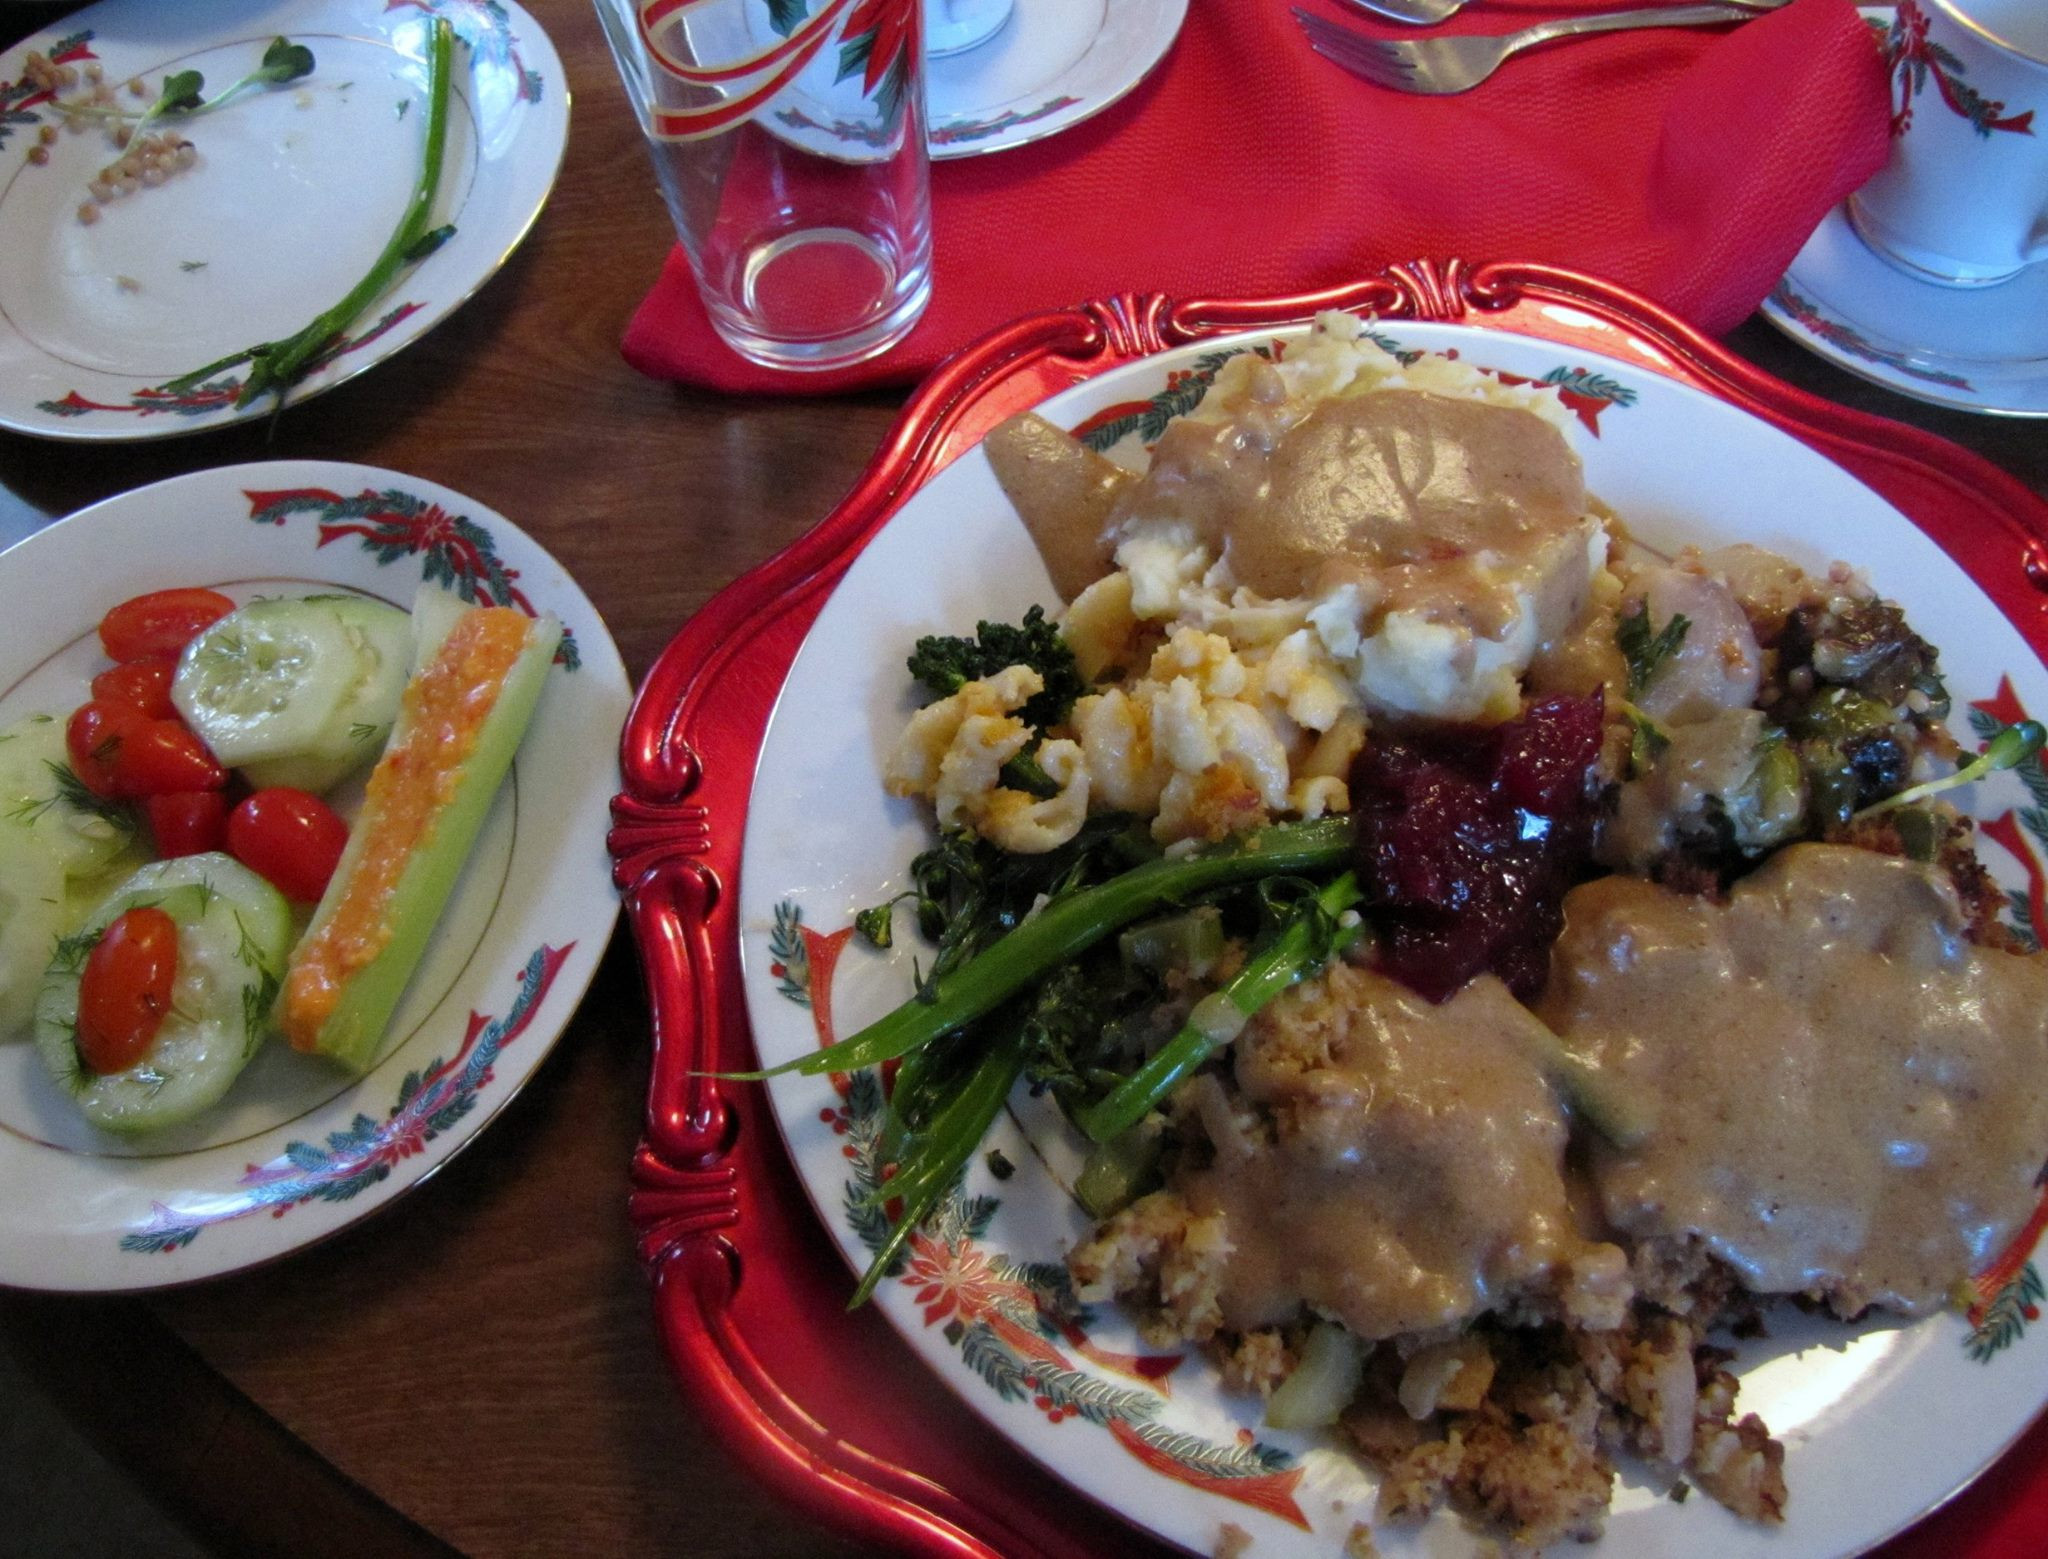 30 Of the Best Ideas for Vegetarian Thanksgiving Main Course - Most